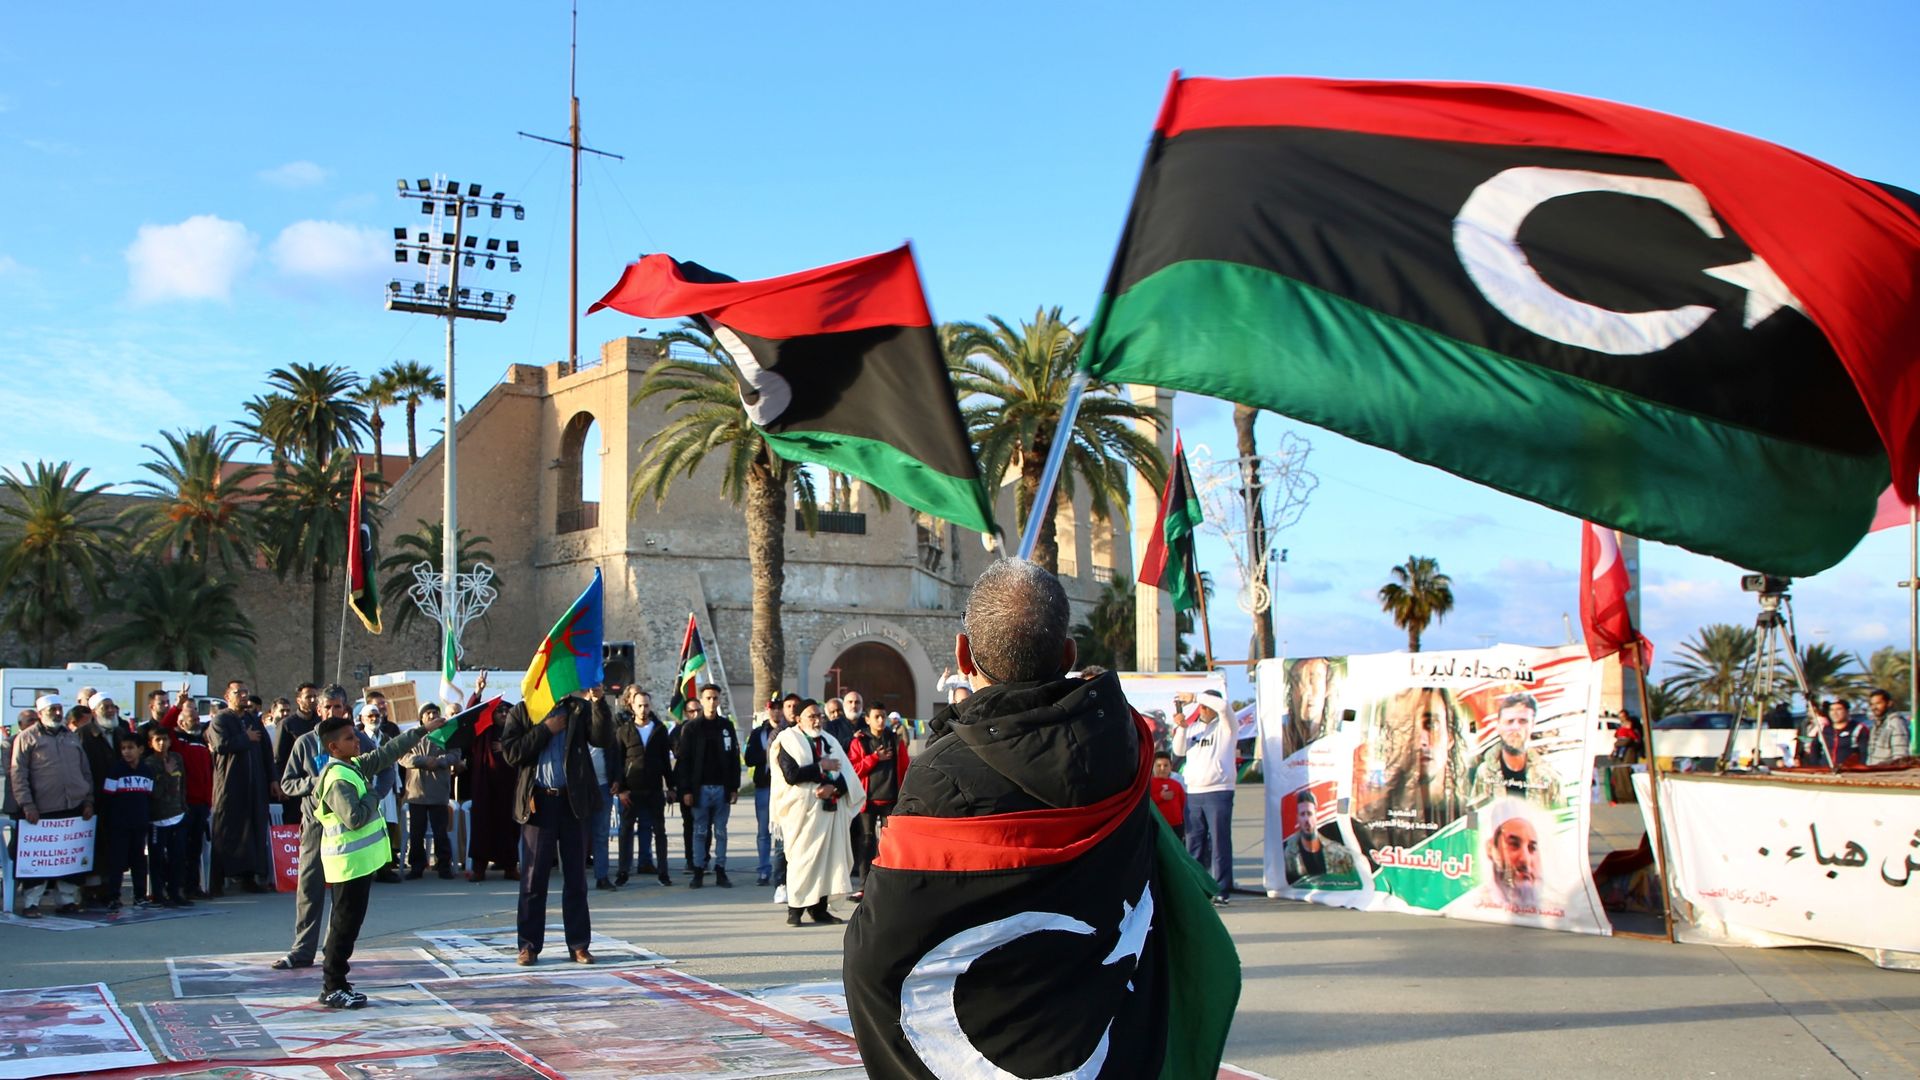 People gather at the Martyrs' Square to stage a protest against attacks.